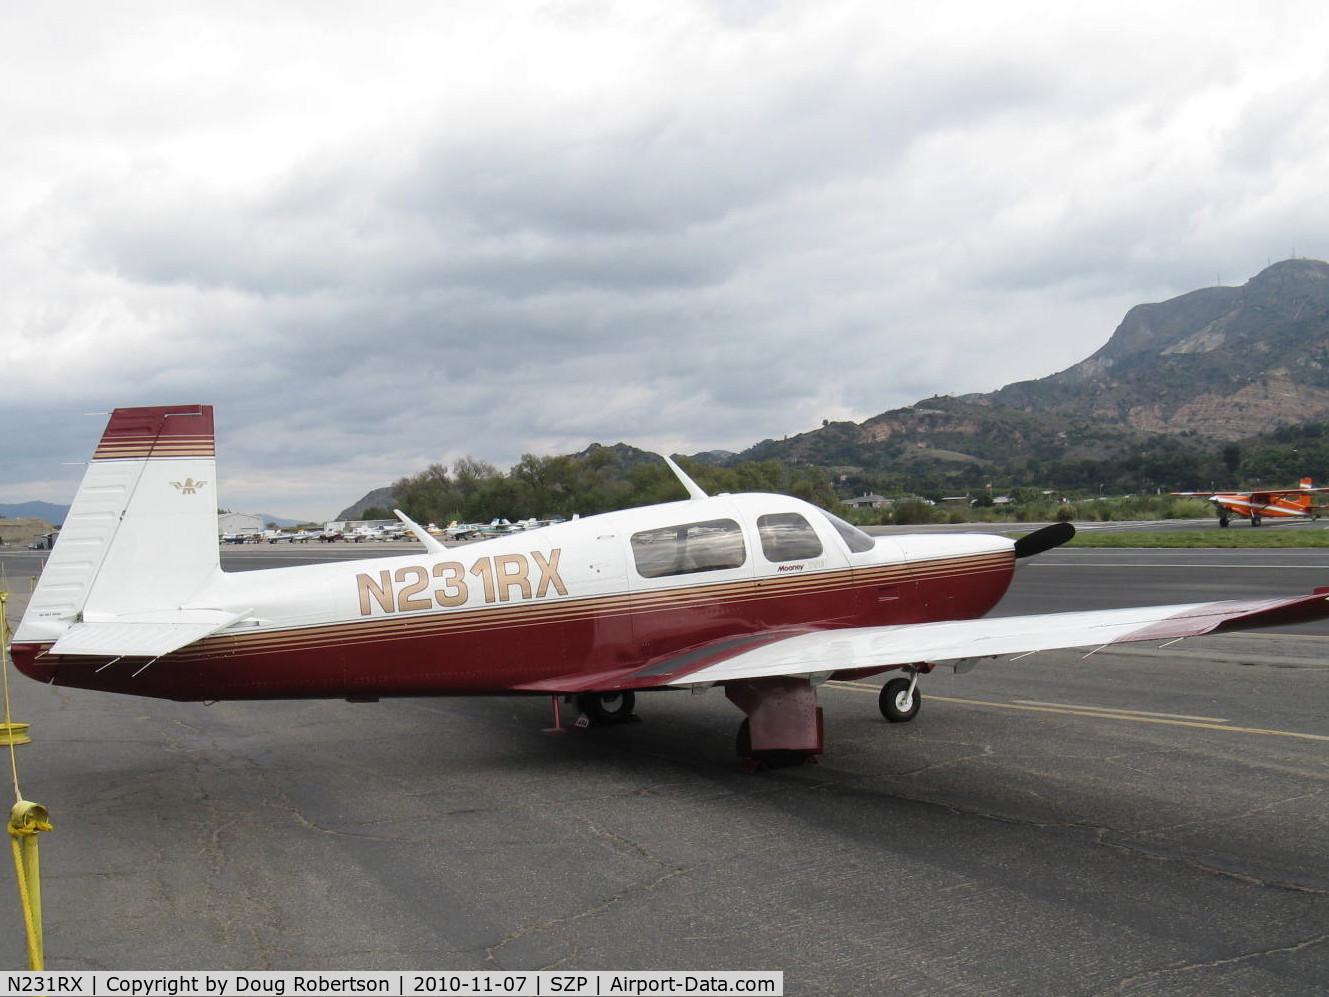 N231RX, 1980 Mooney M20K C/N 25-0305, 1980 Mooney M20K TSE Turbo Special Edition, Continental TSIO-360-GB 6 cylinder turbocharged with Rajay fixed wastegate turbocharger, 75 gallons, 4 place